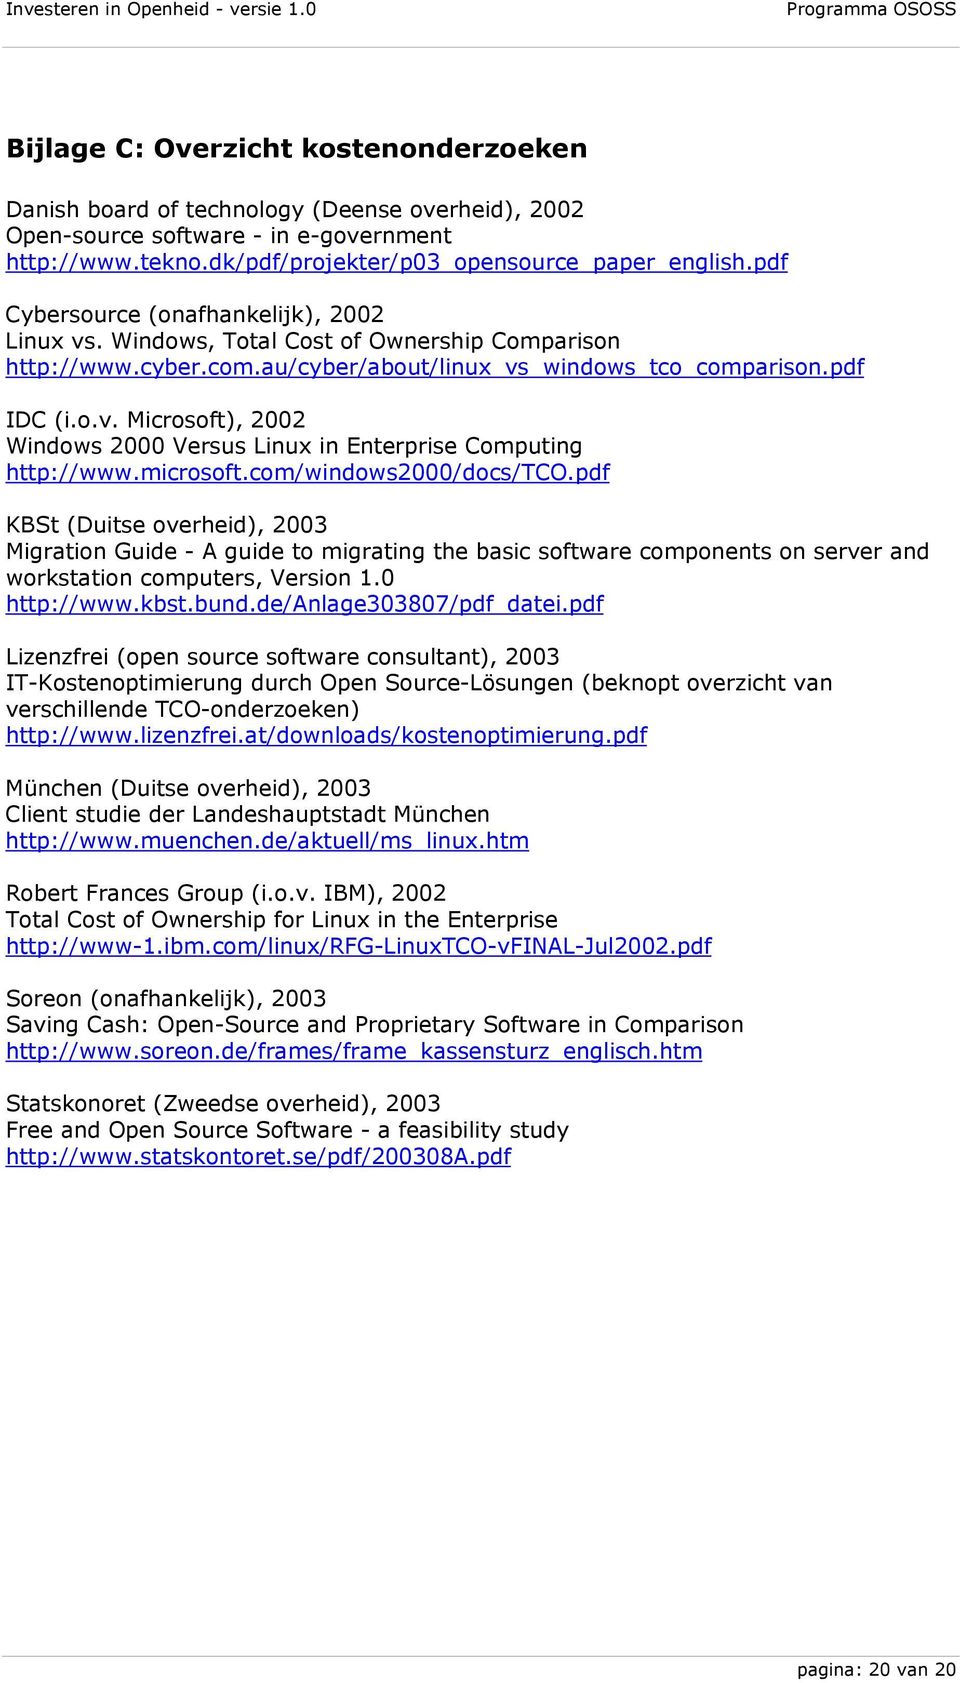 microsoft.com/windows2000/docs/tco.pdf KBSt (Duitse overheid), 2003 Migration Guide - A guide to migrating the basic software components on server and workstation computers, Version 1.0 http://www.